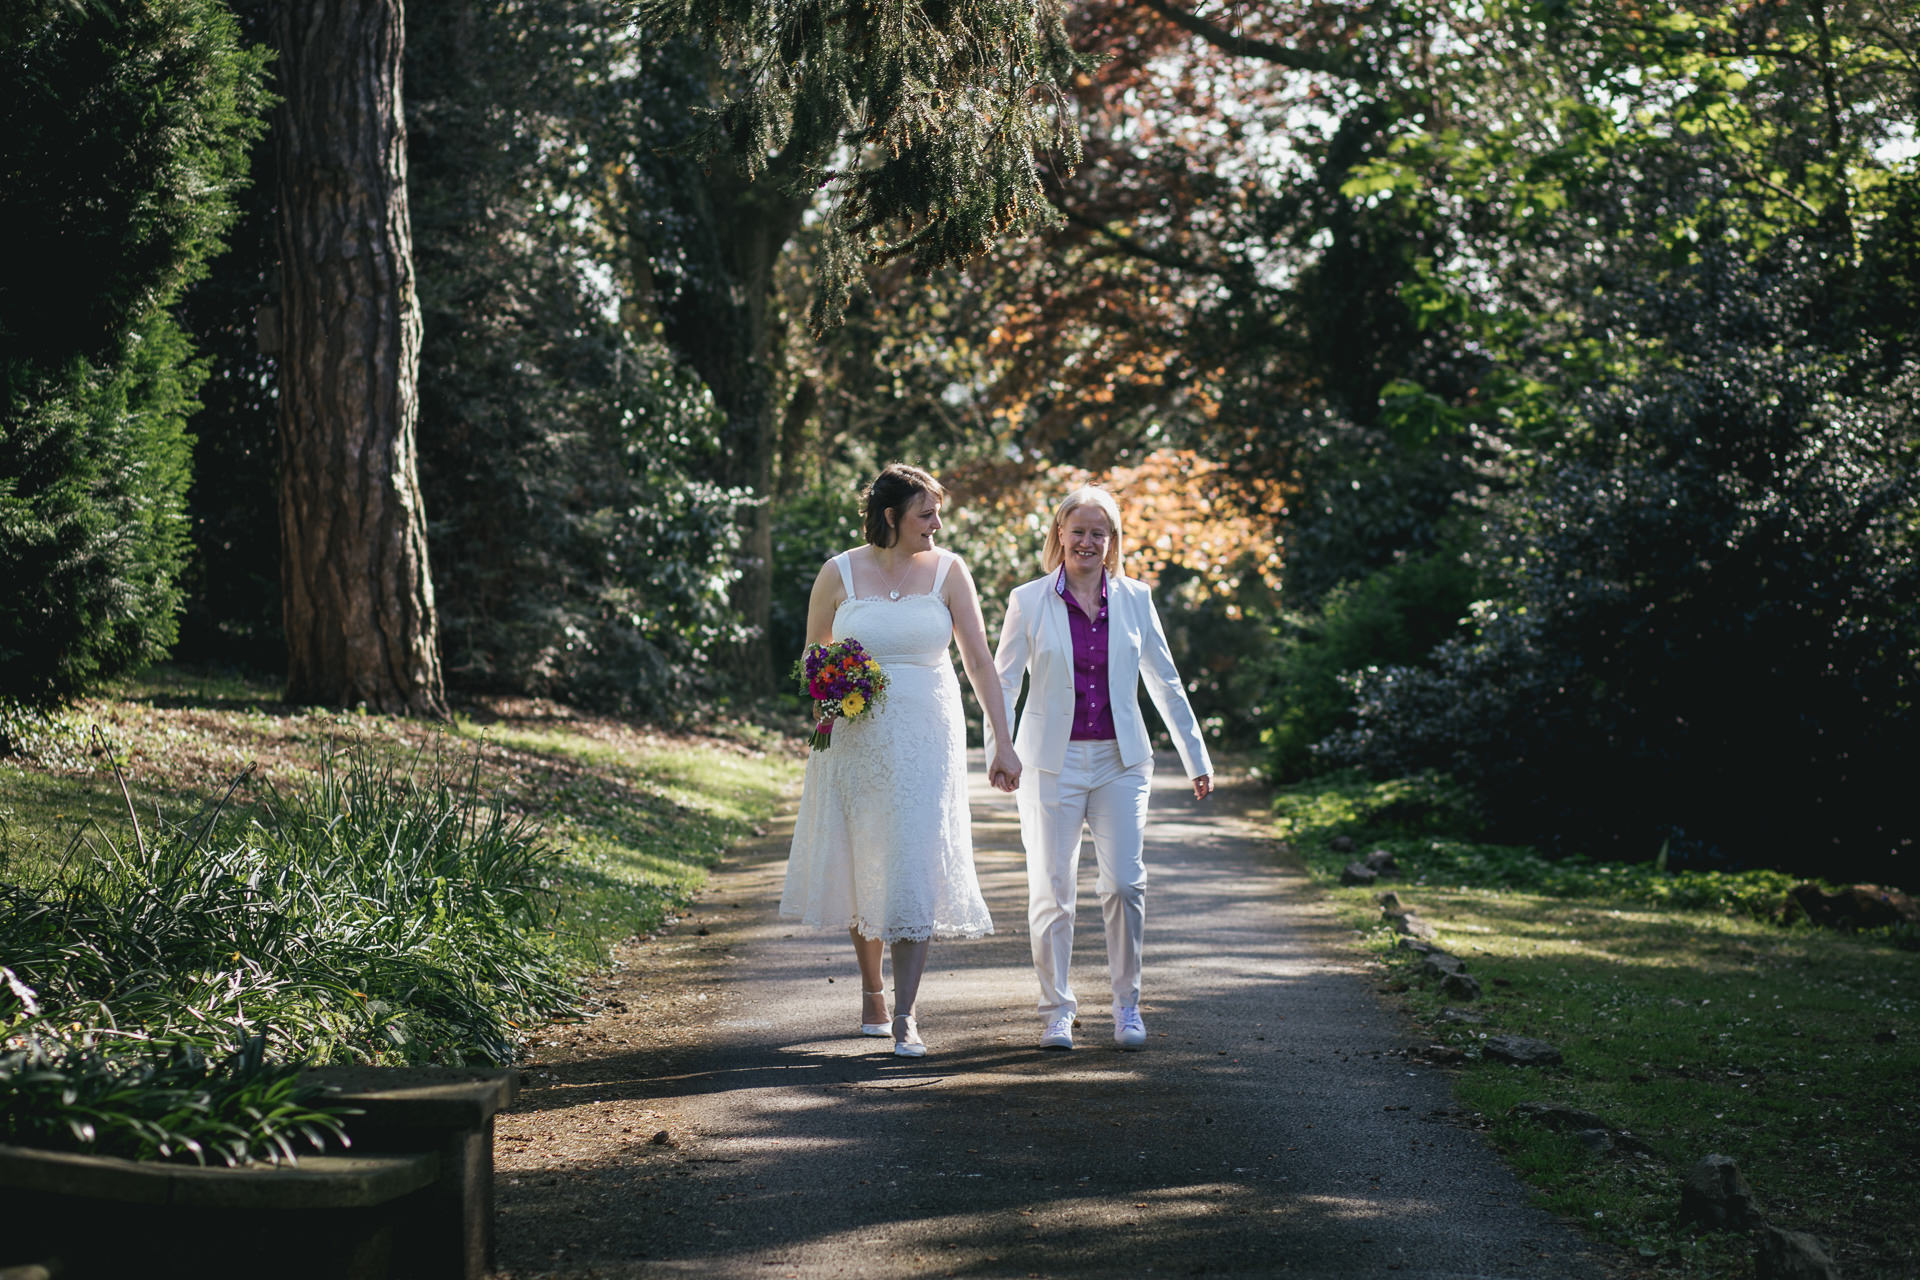 Two brides, just married, walking and smiling together